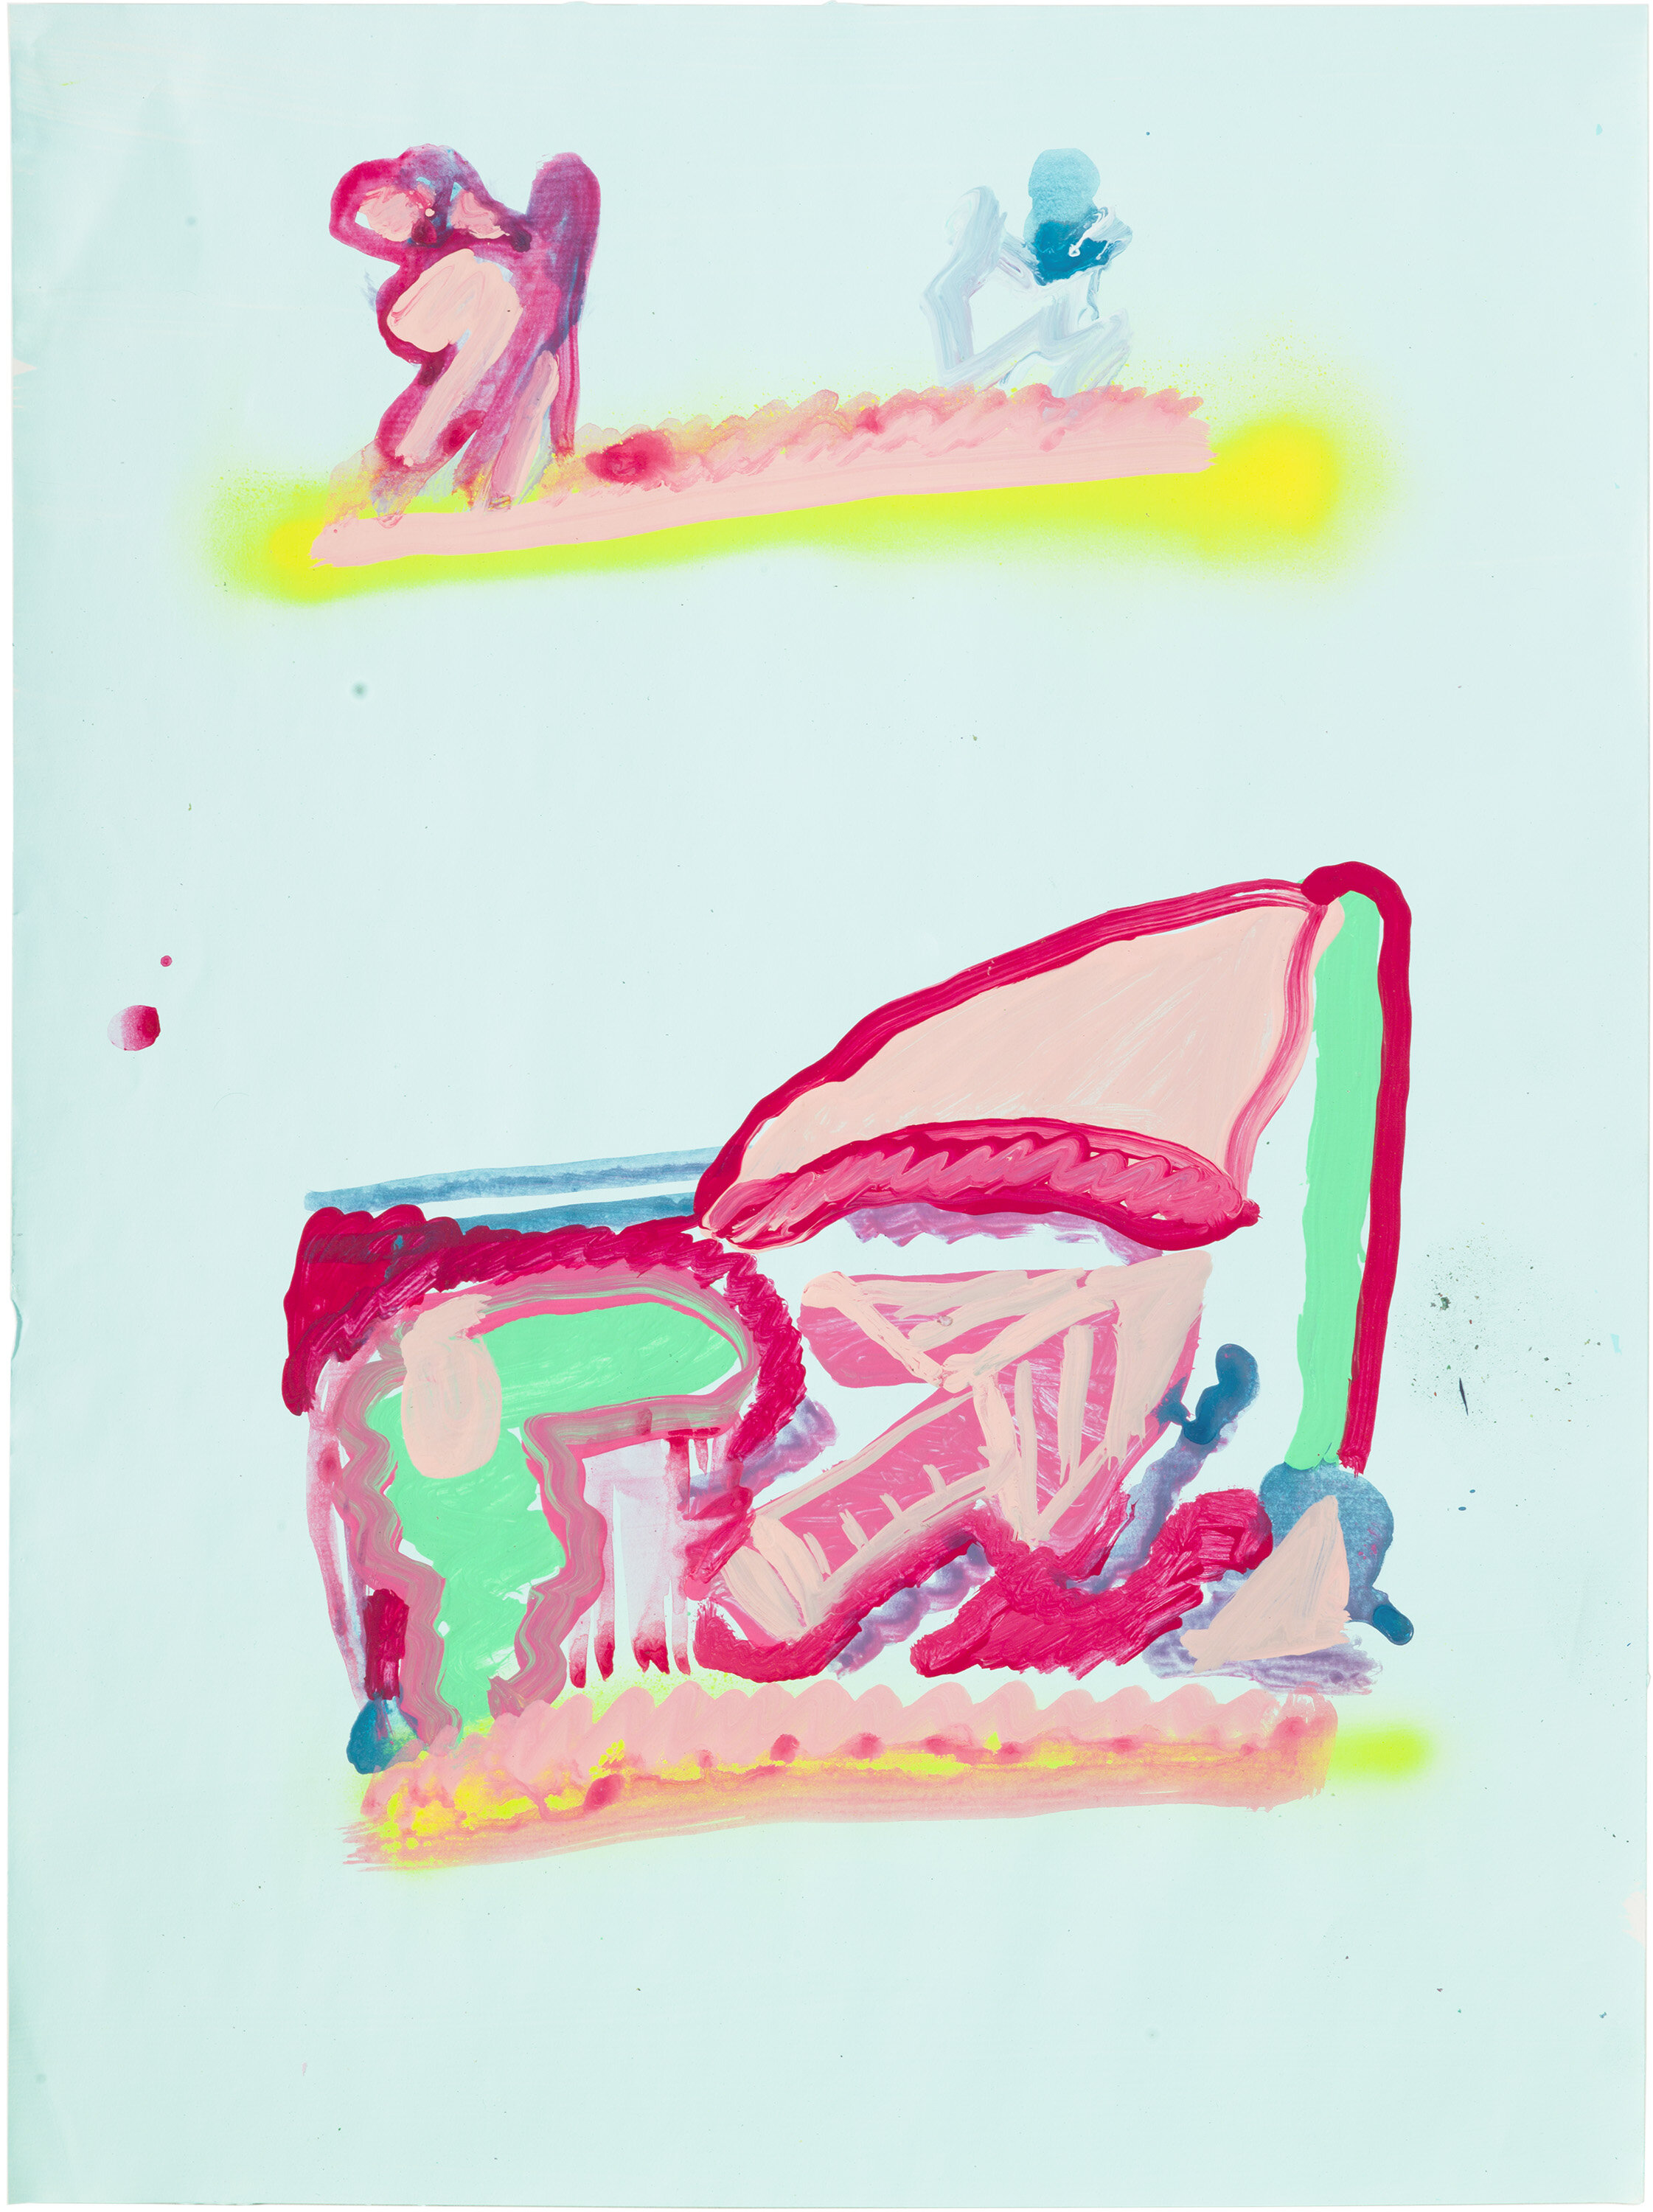  Drew Beattie and Ben Shepard   DBBS-DRW-2015-135   2015  acrylic and spray paint on paper  24 x 18 inches 